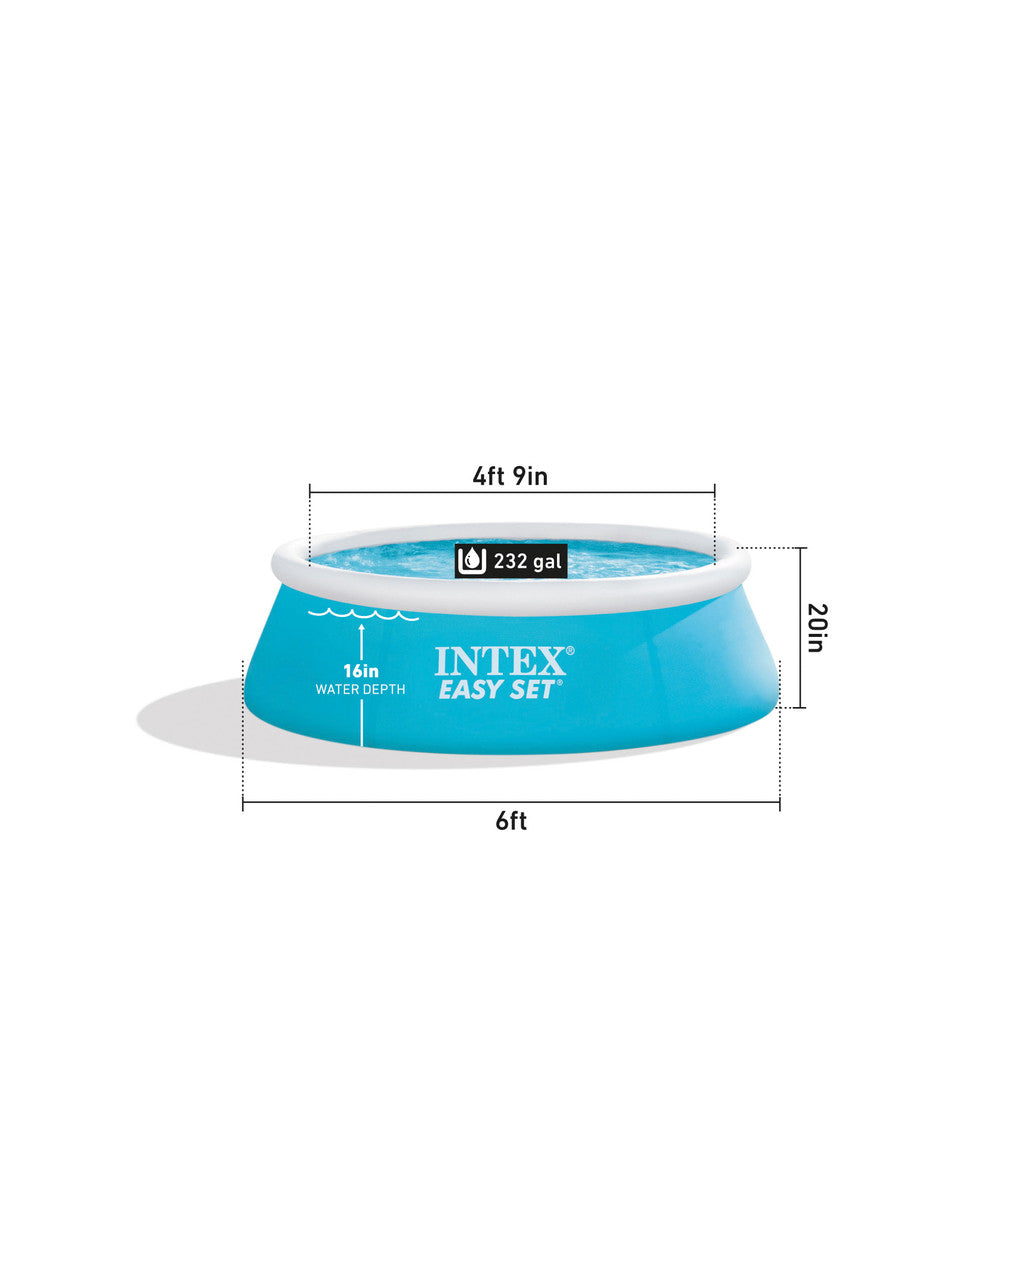 Get ready for a refreshing splash in the Intex pool! This inflatable beauty features a 3-ft diameter, 232-gal capacity.